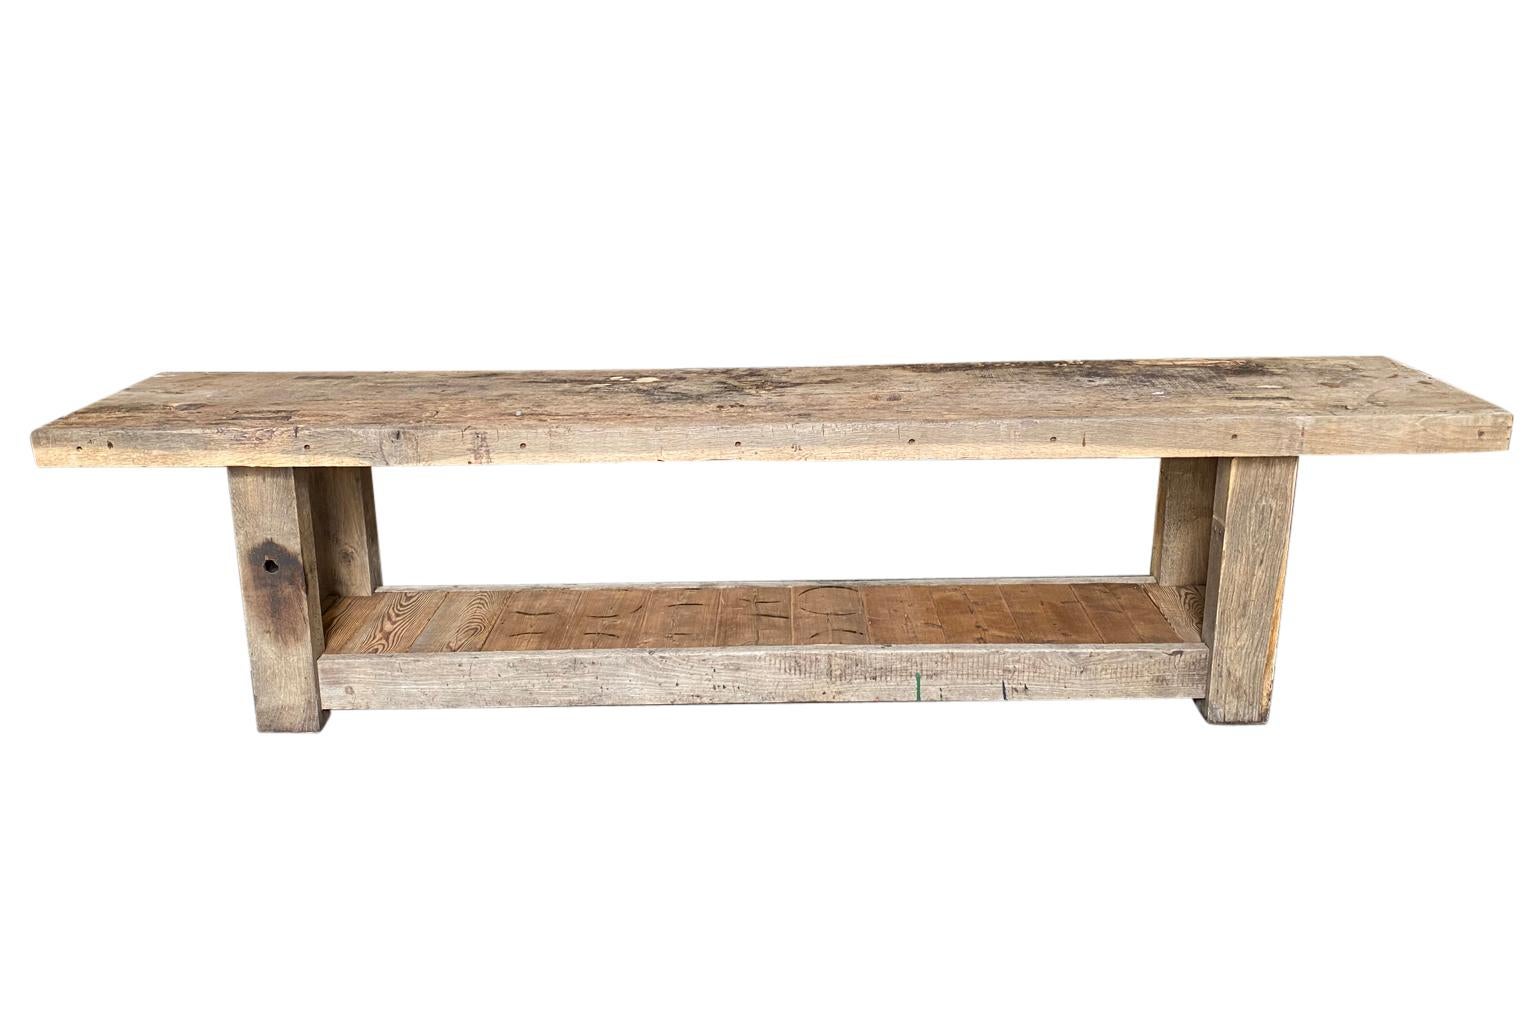 A very nice later 19th century Etabli - Work table from the South of France soundly constructed from naturally washed oak and pine. Wonderful as a console table or set up as a bar.